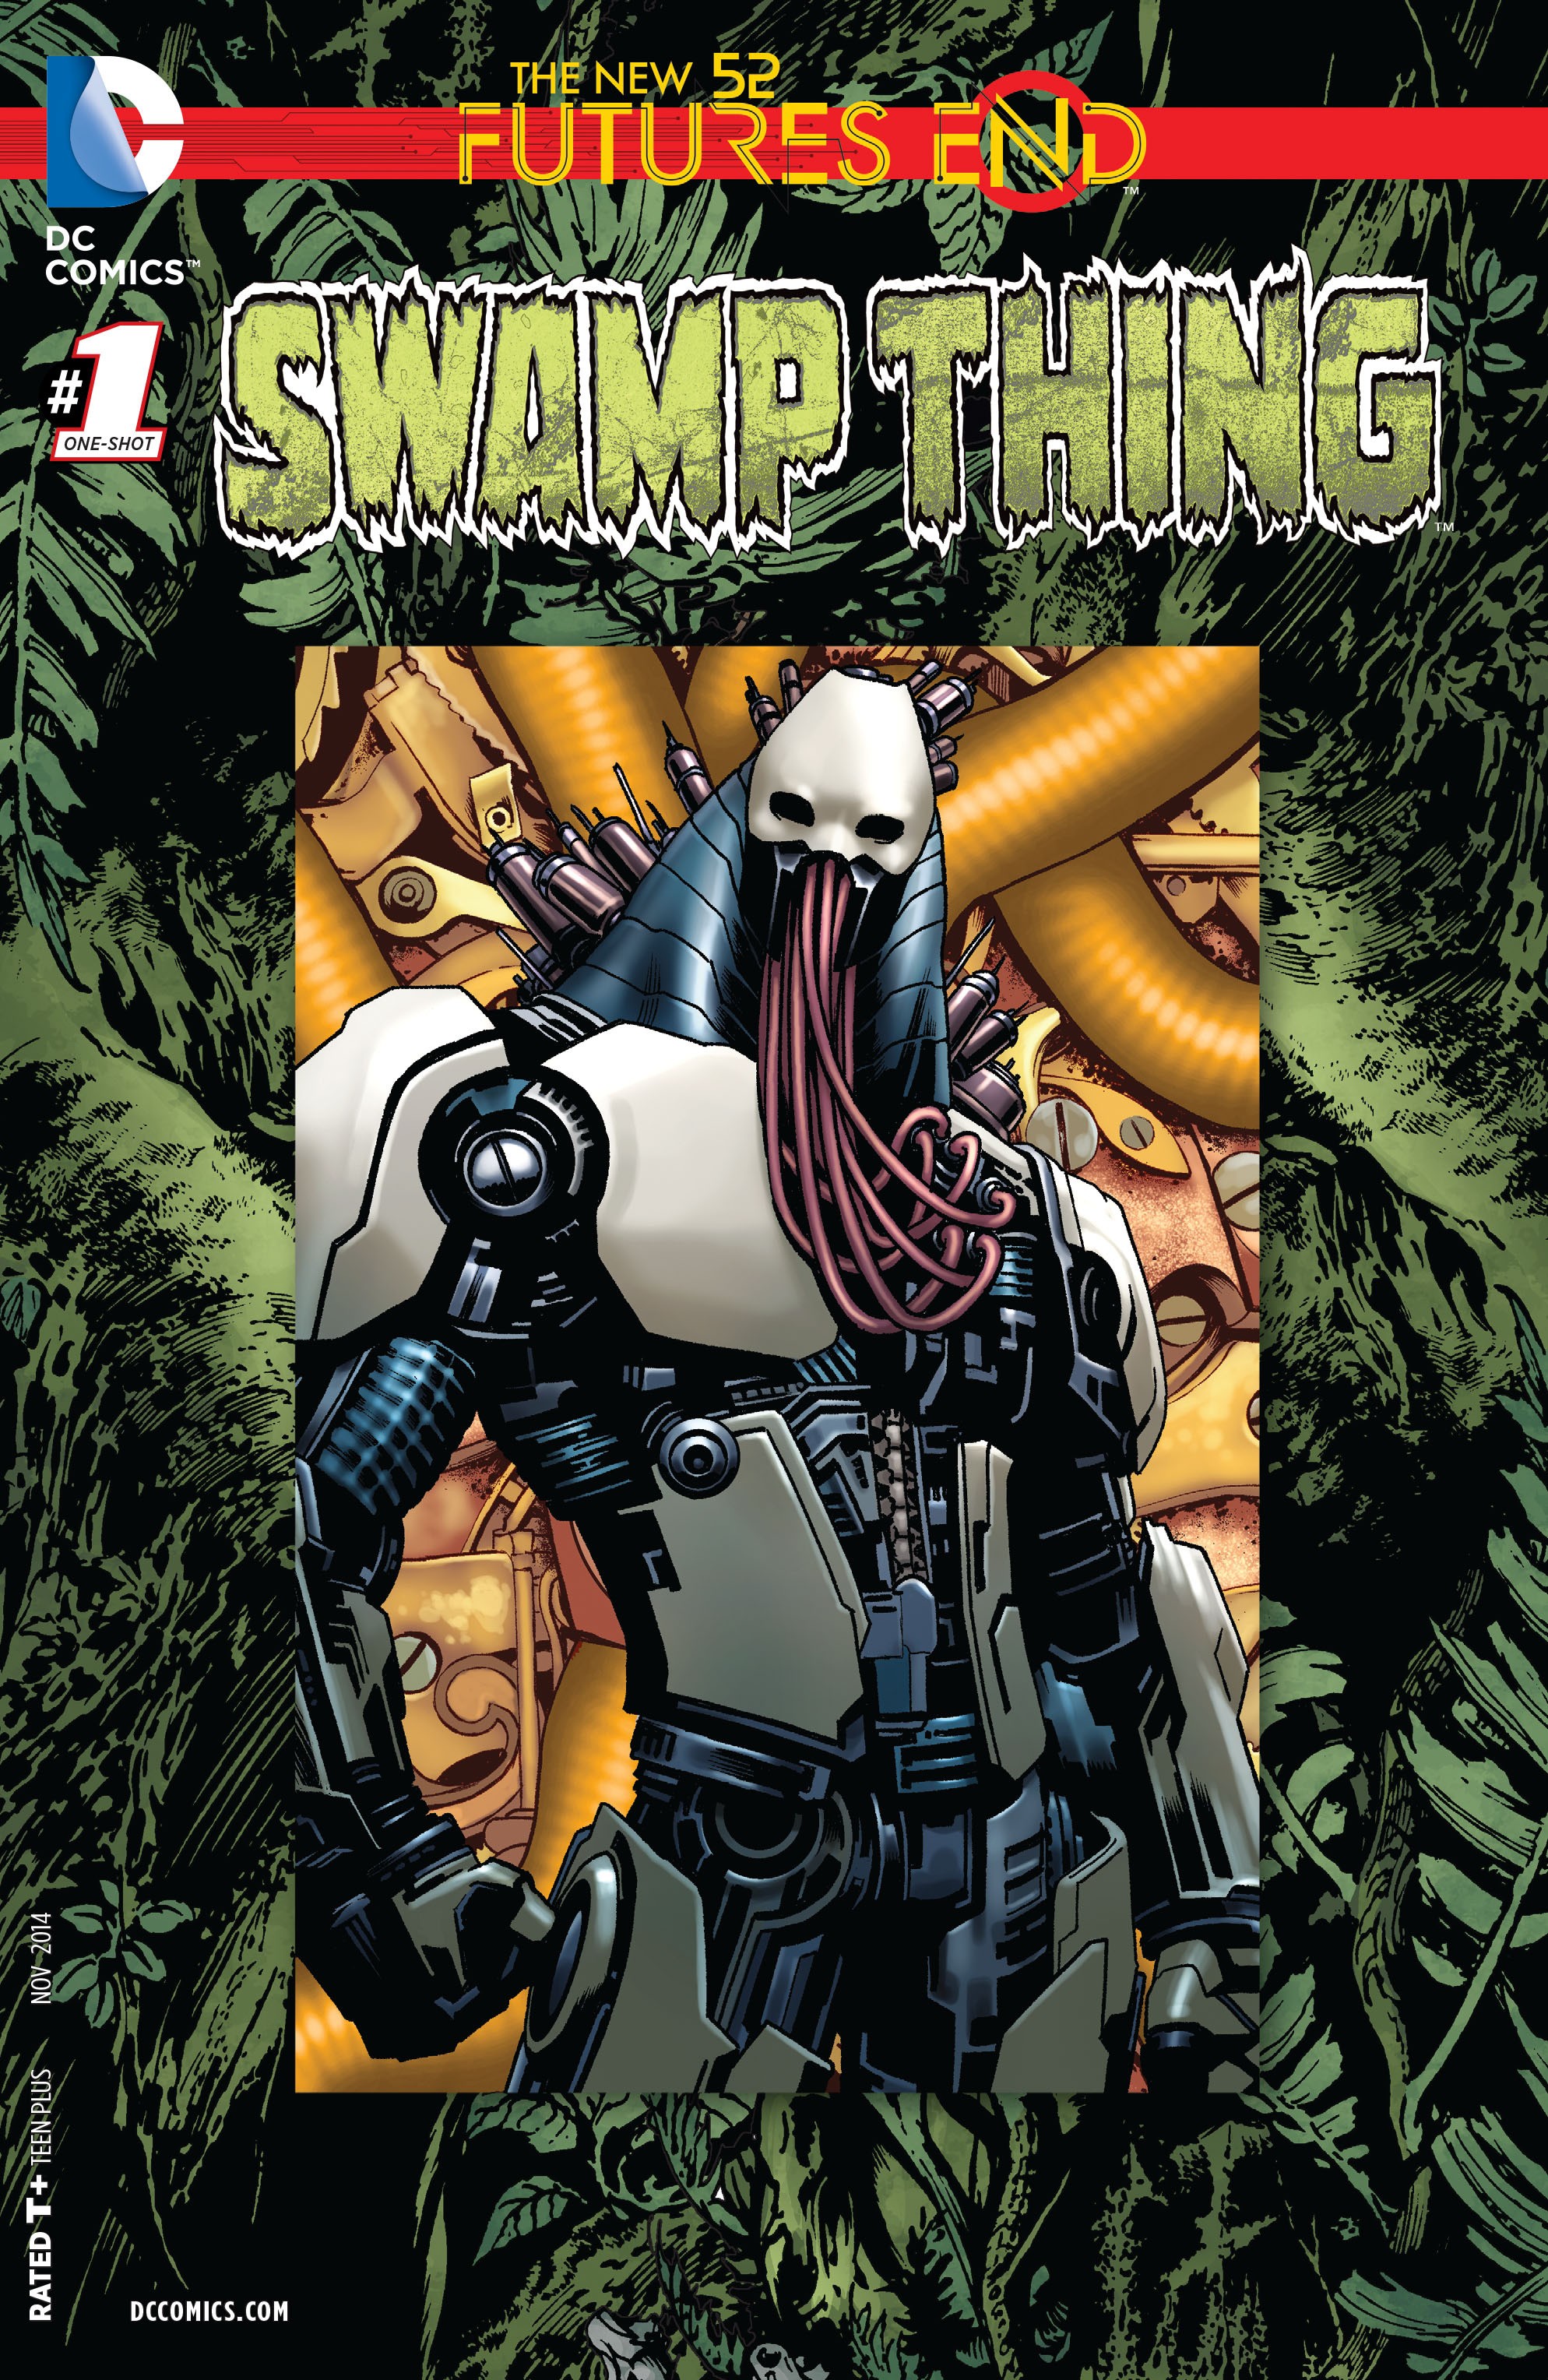 Swamp Thing: Futures End Vol. 1 #1